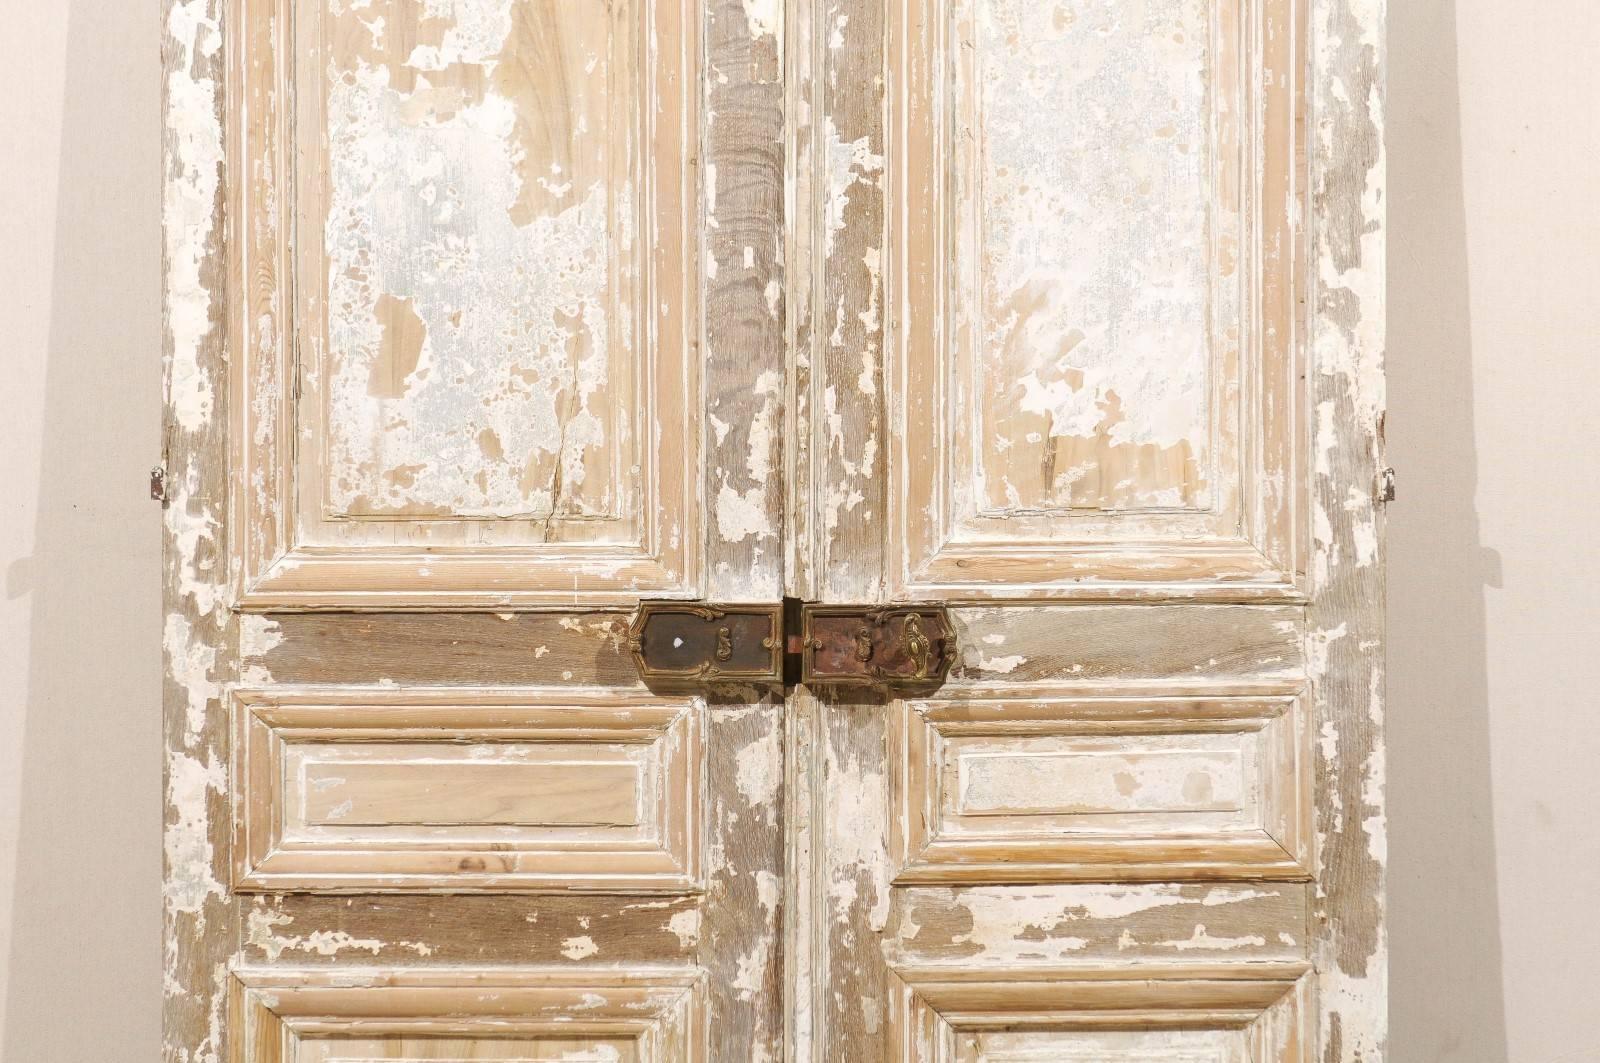 Pair of Aged Tall French Doors with Nice Old Hardware from the Mid-19th Century 1